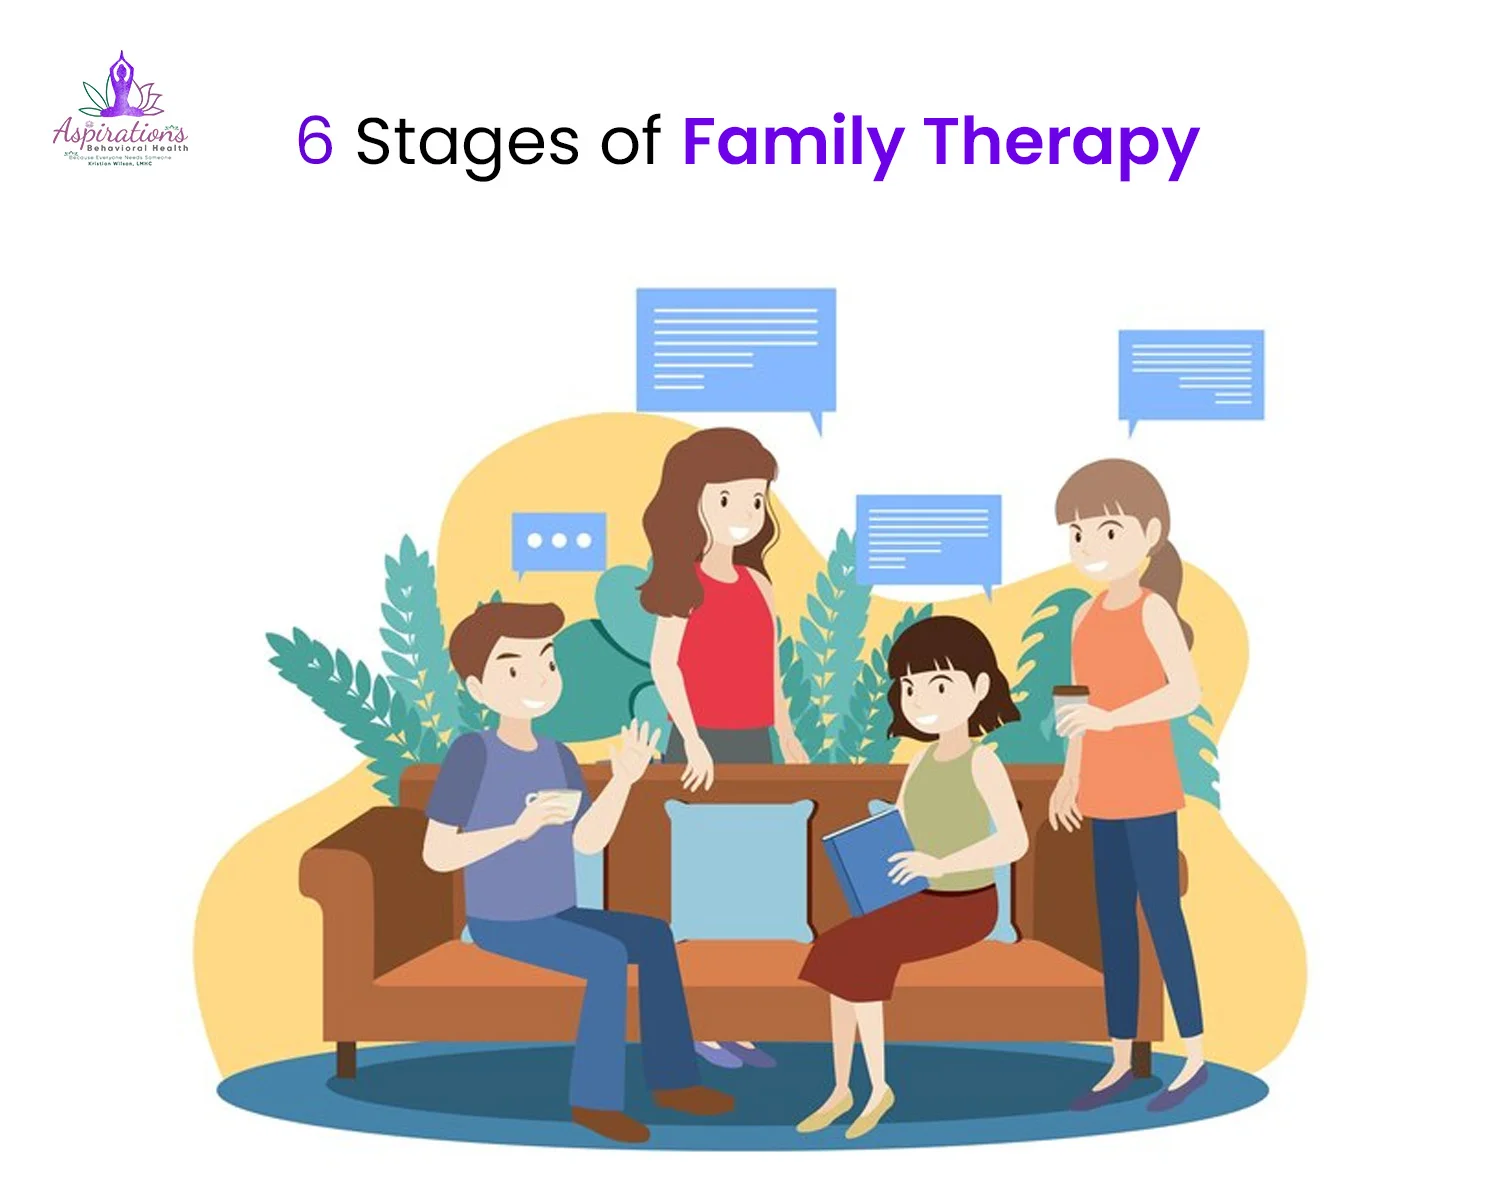 6 Stages of Family Therapy